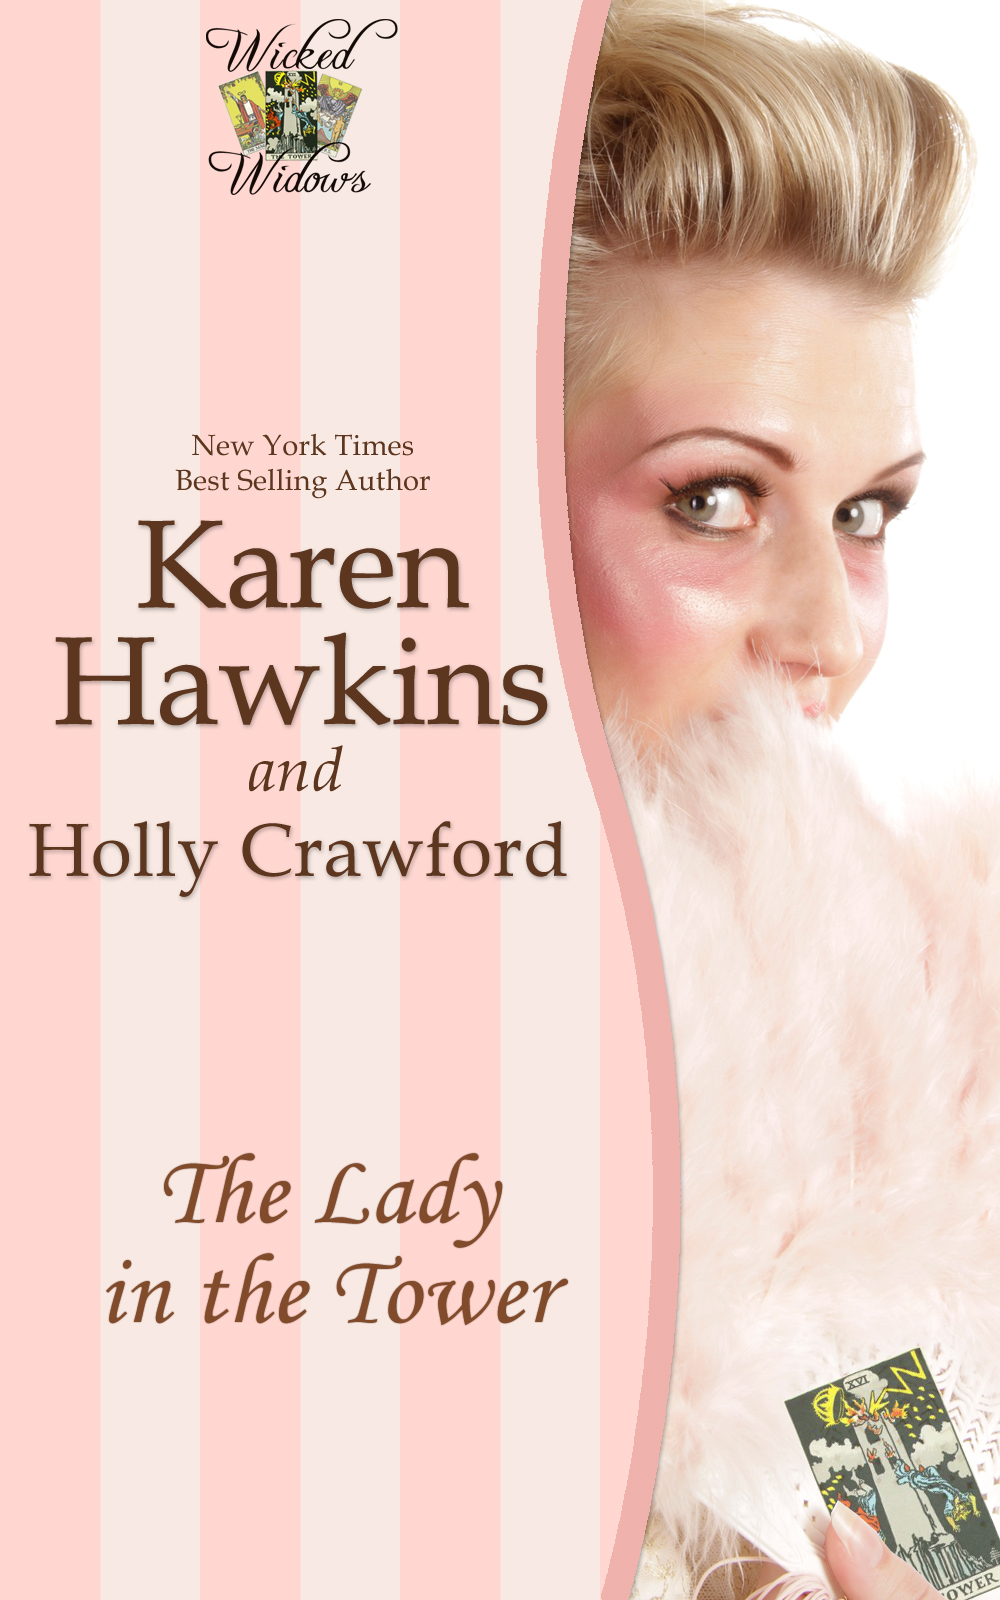 The Lady in the Tower by Karen Hawkins and Holly Crawford